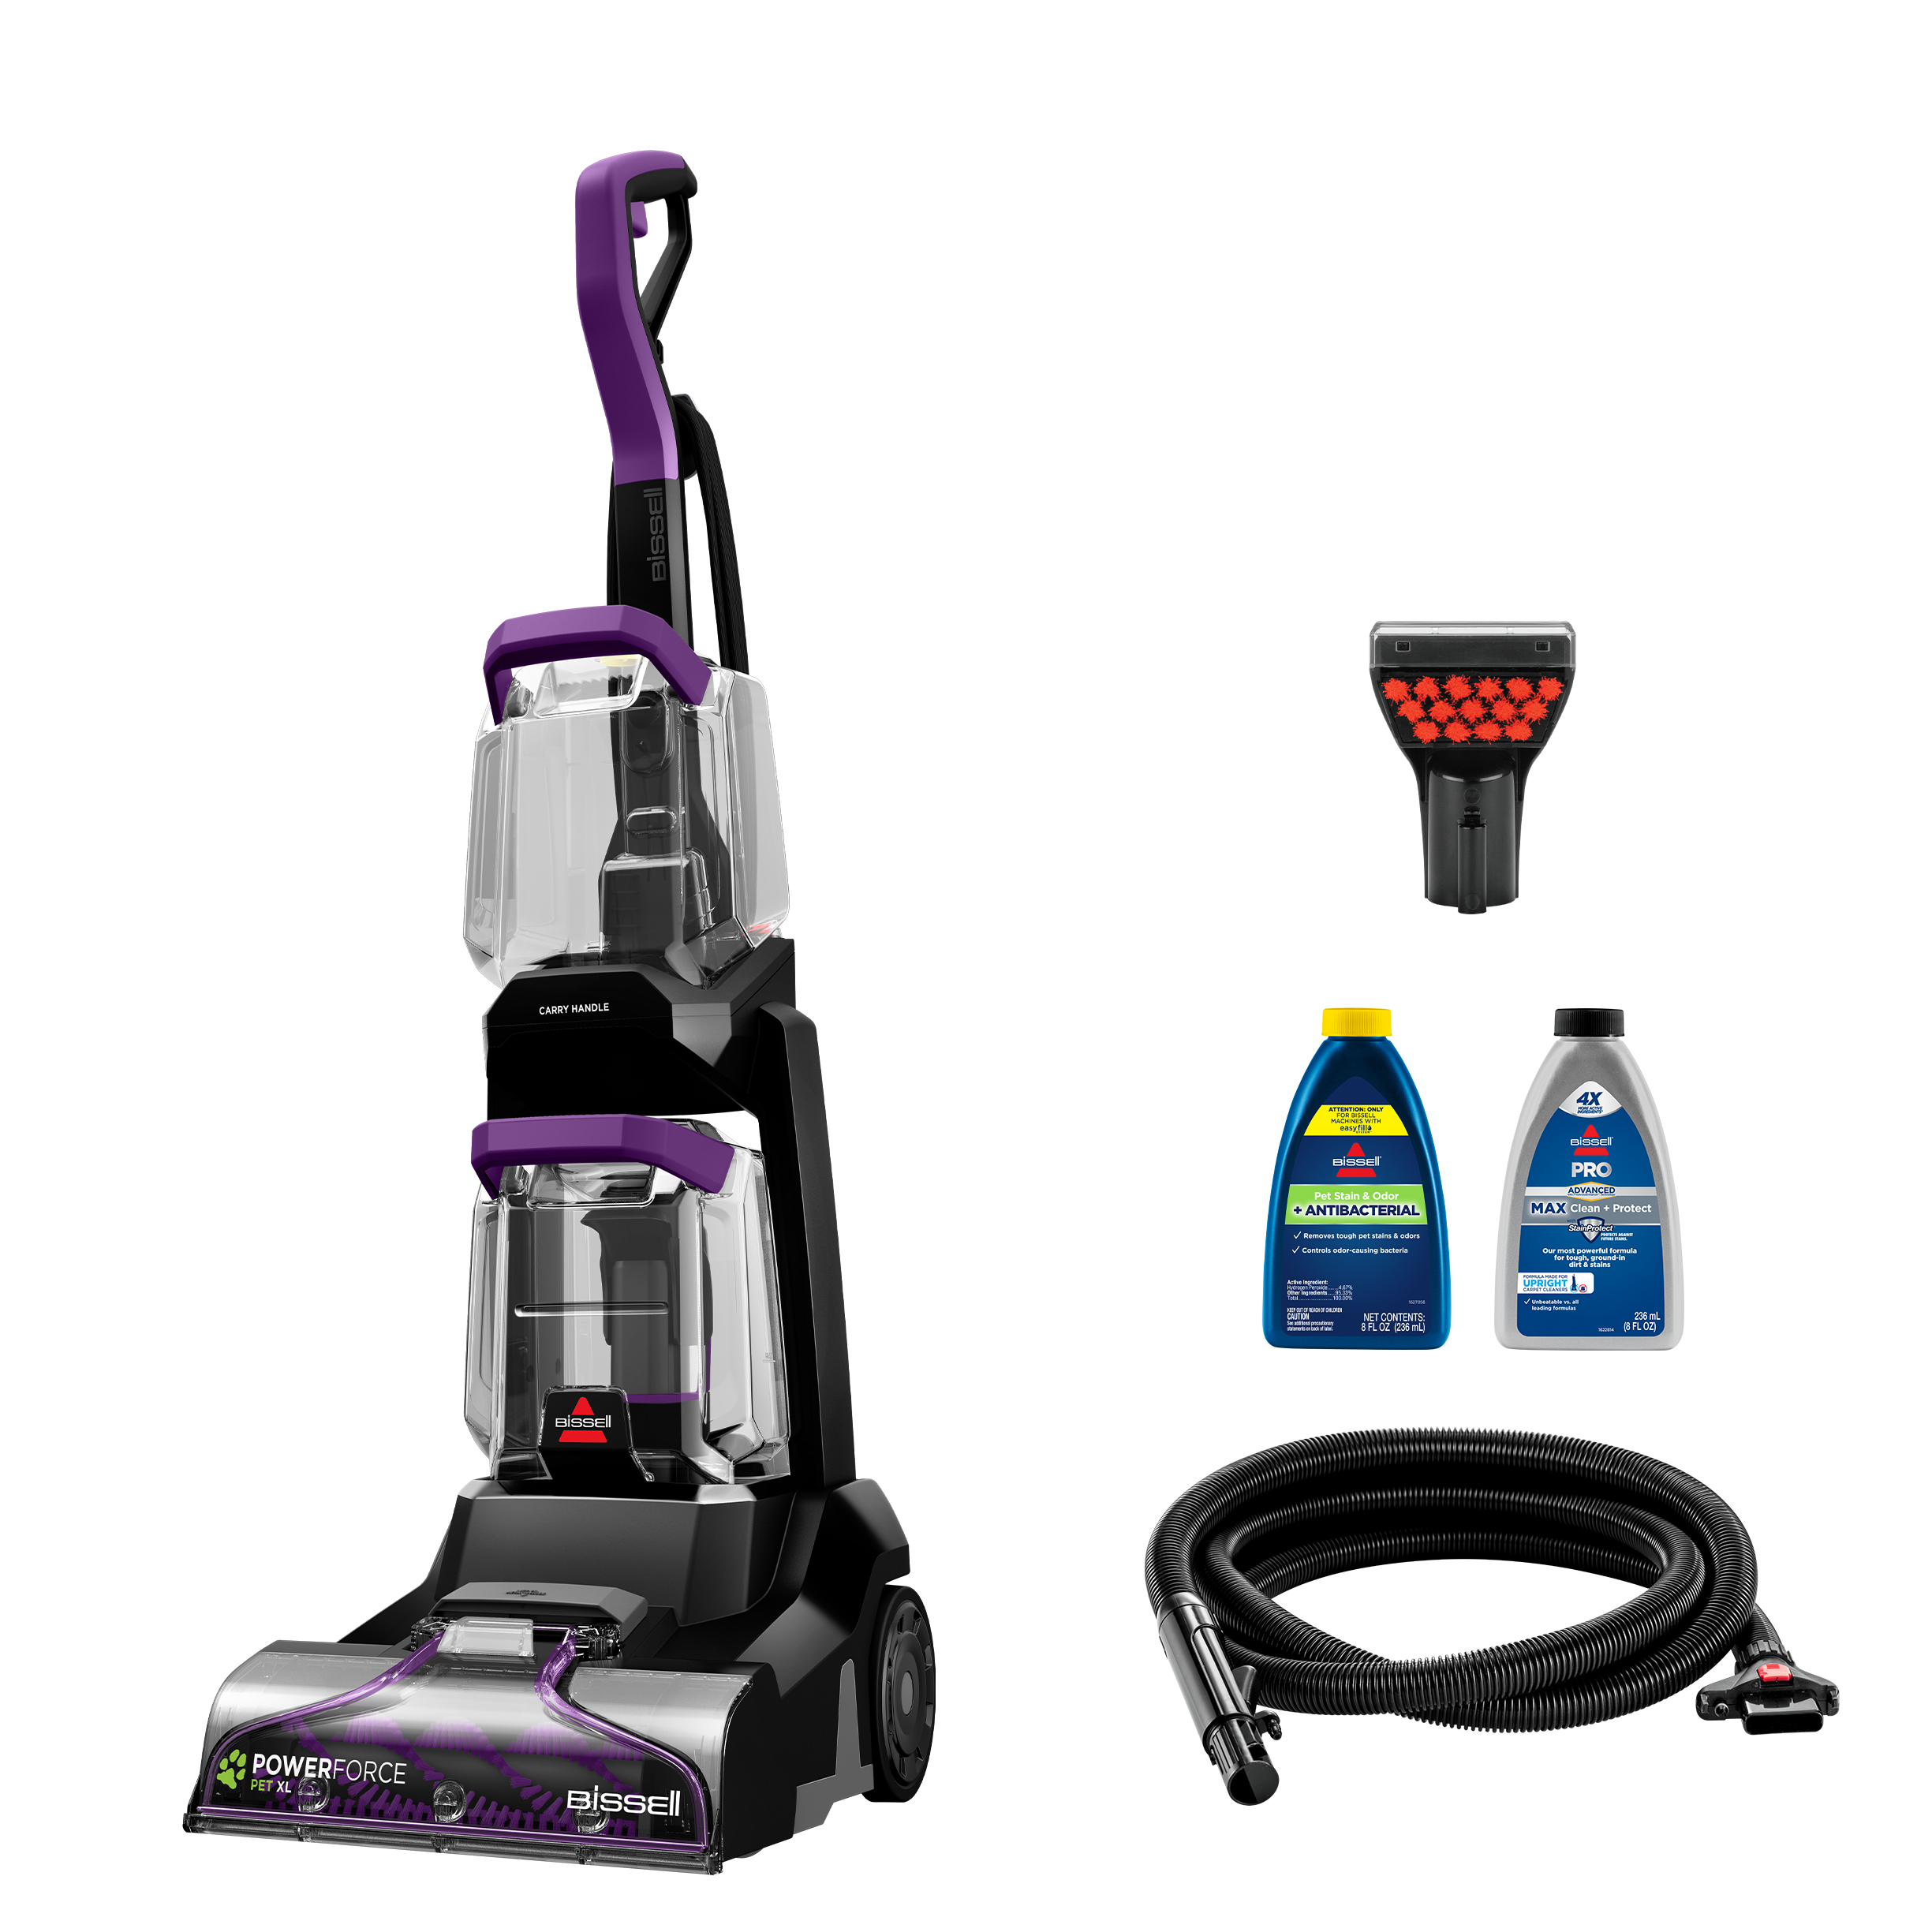 BISSELL® PowerForce™ Pet XL Upright Carpet Cleaner 3748 - image 1 of 8